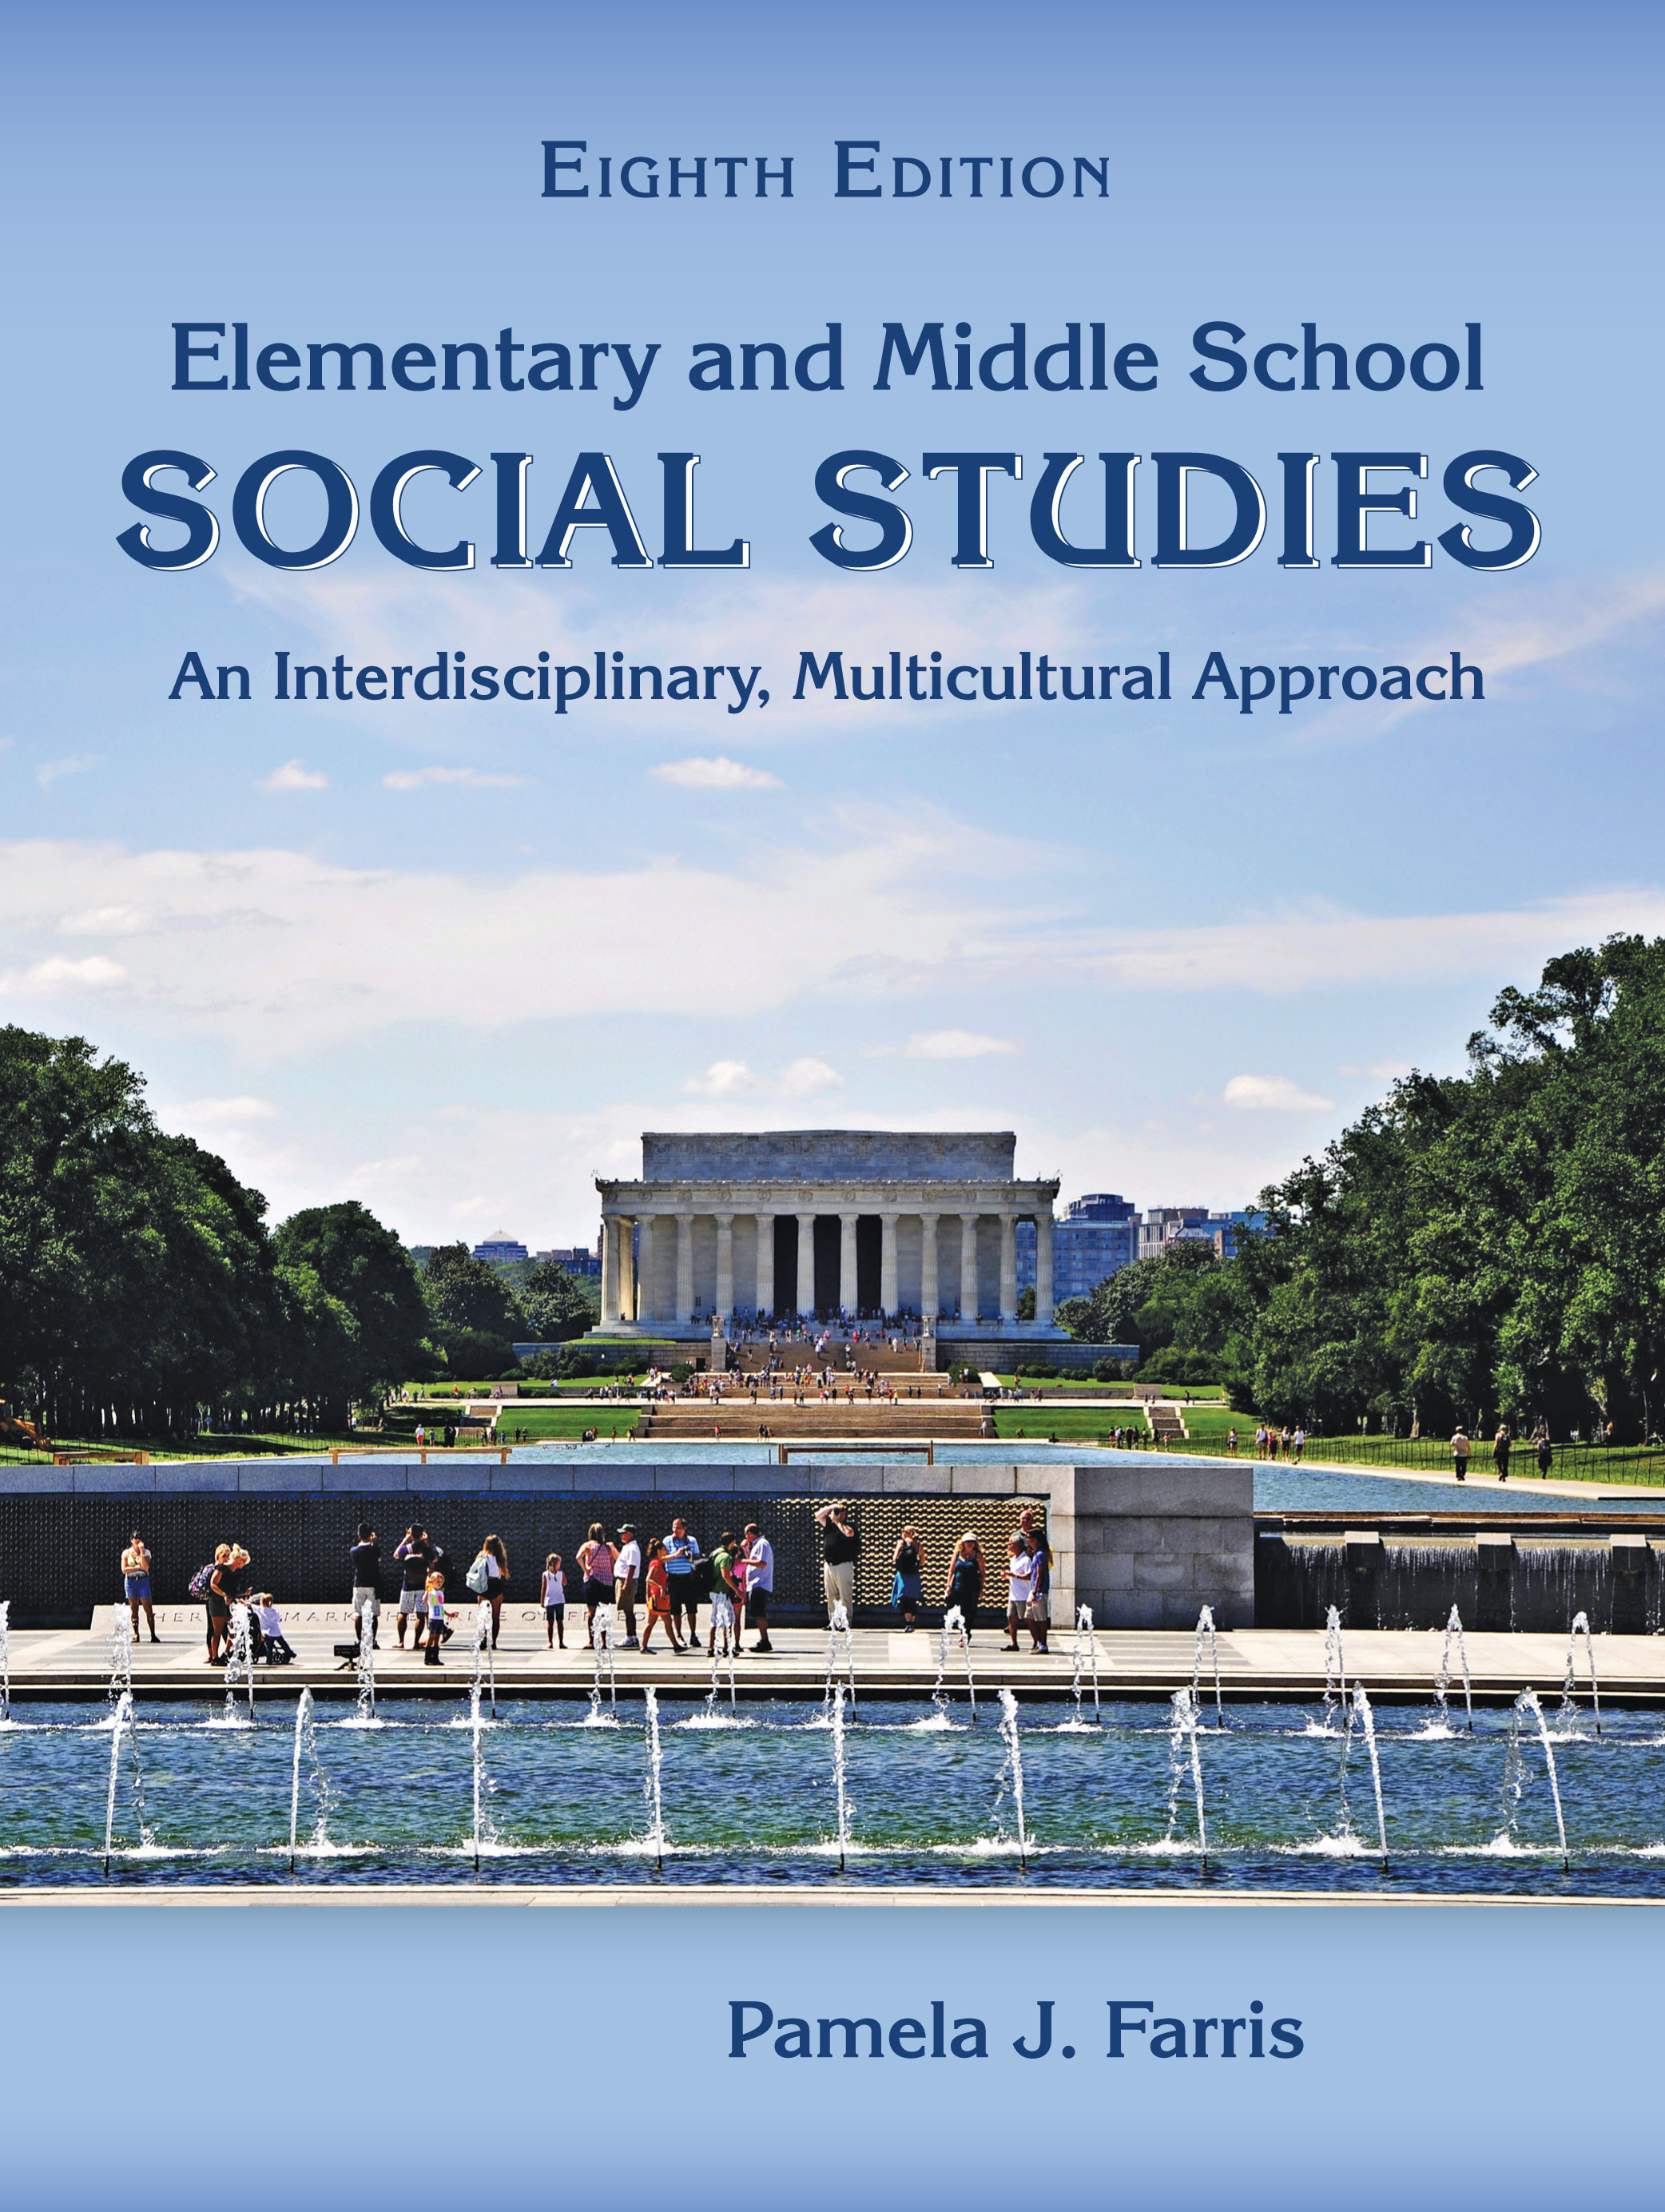 Elementary and Middle School Social Studies: An Interdisciplinary, Multicultural Approach, Eighth Edition by Pamela J. Farris